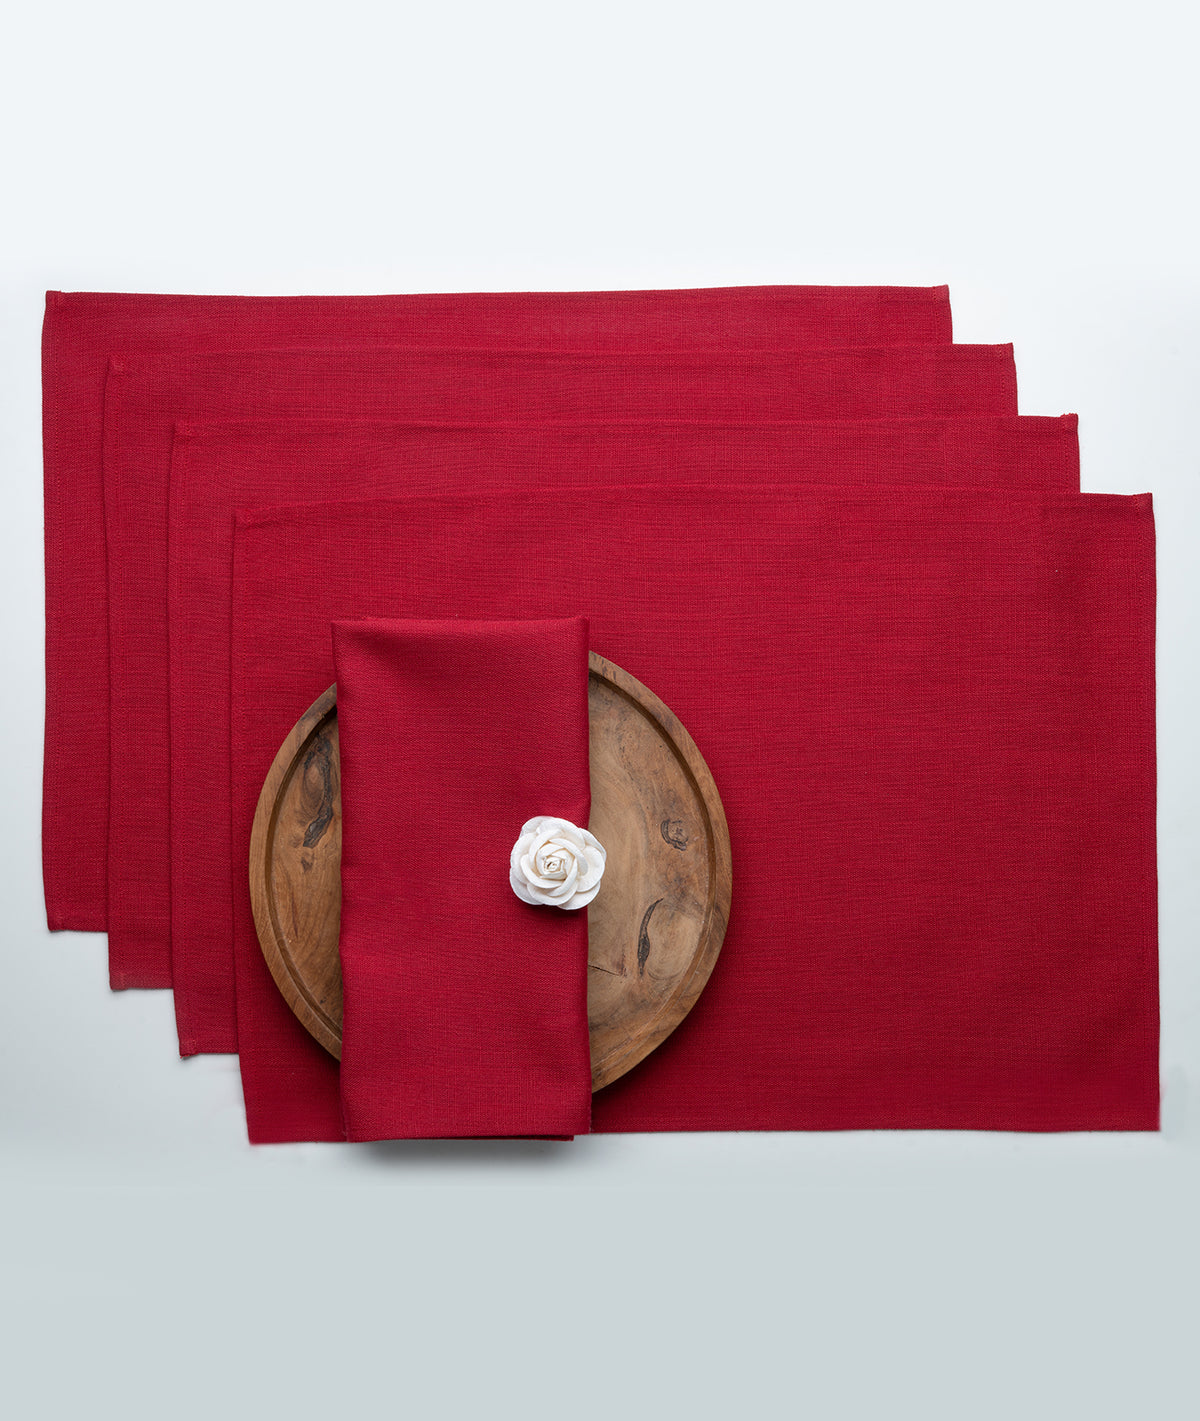 Red Linen Textured Placemats 13 x 18 Inch Set of 4 - Plain